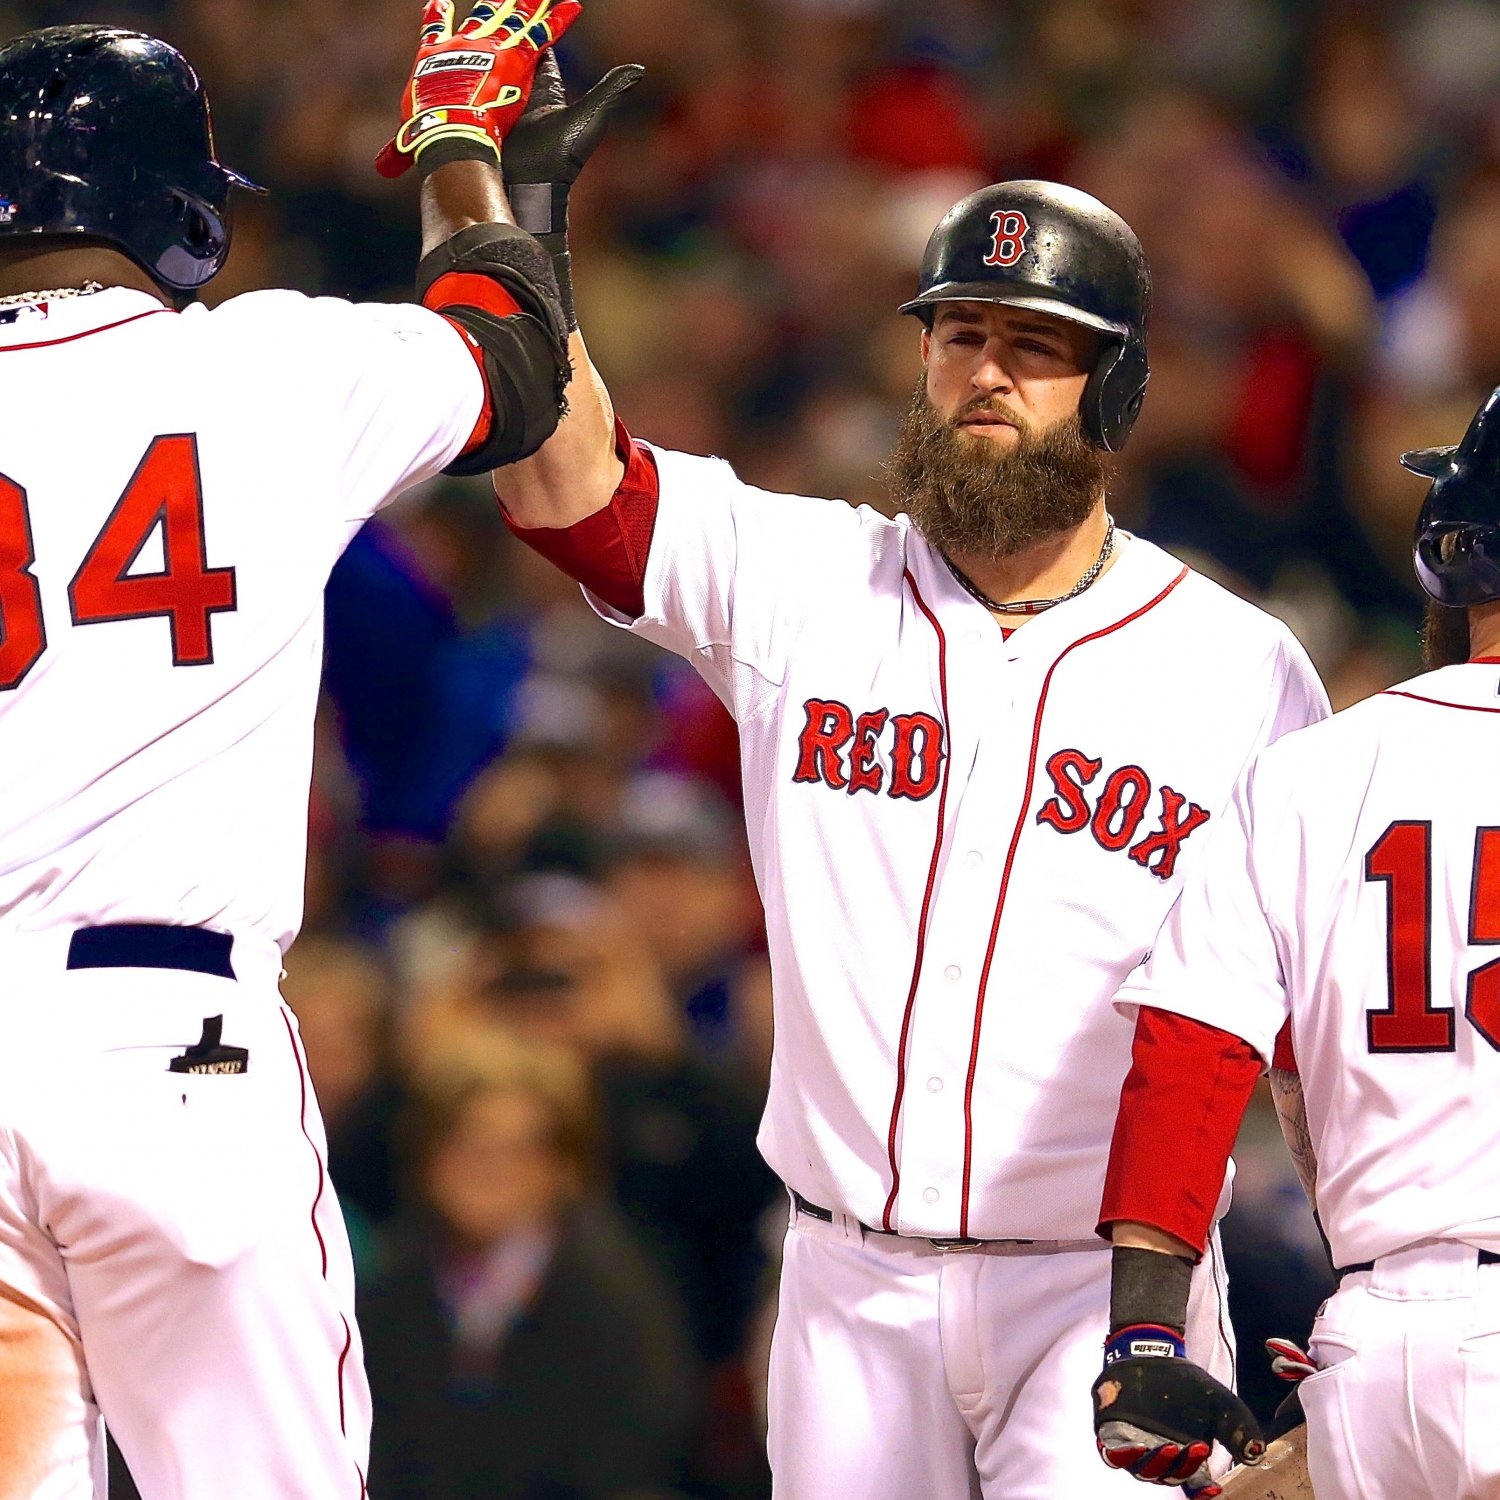 Cardinals vs. Red Sox: Score, Grades and Analysis for 2013 World Series Game 1 | Bleacher Report